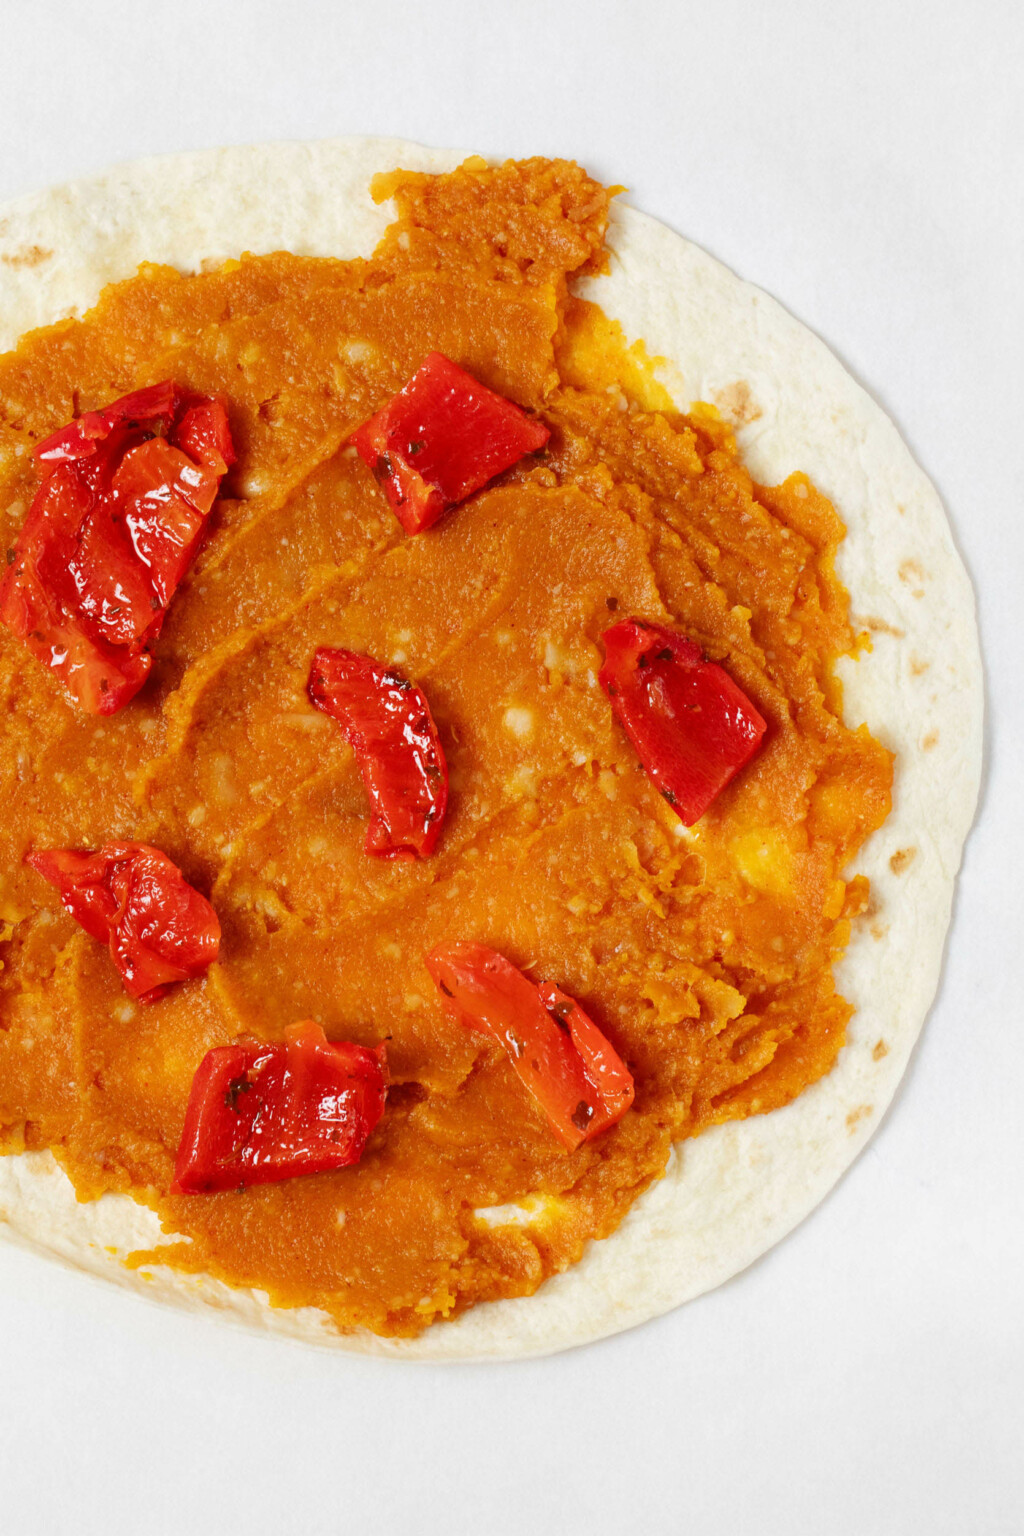 An overhead image of a round tortilla, which is filled with mashed sweet potato and pieces of roasted red pepper.